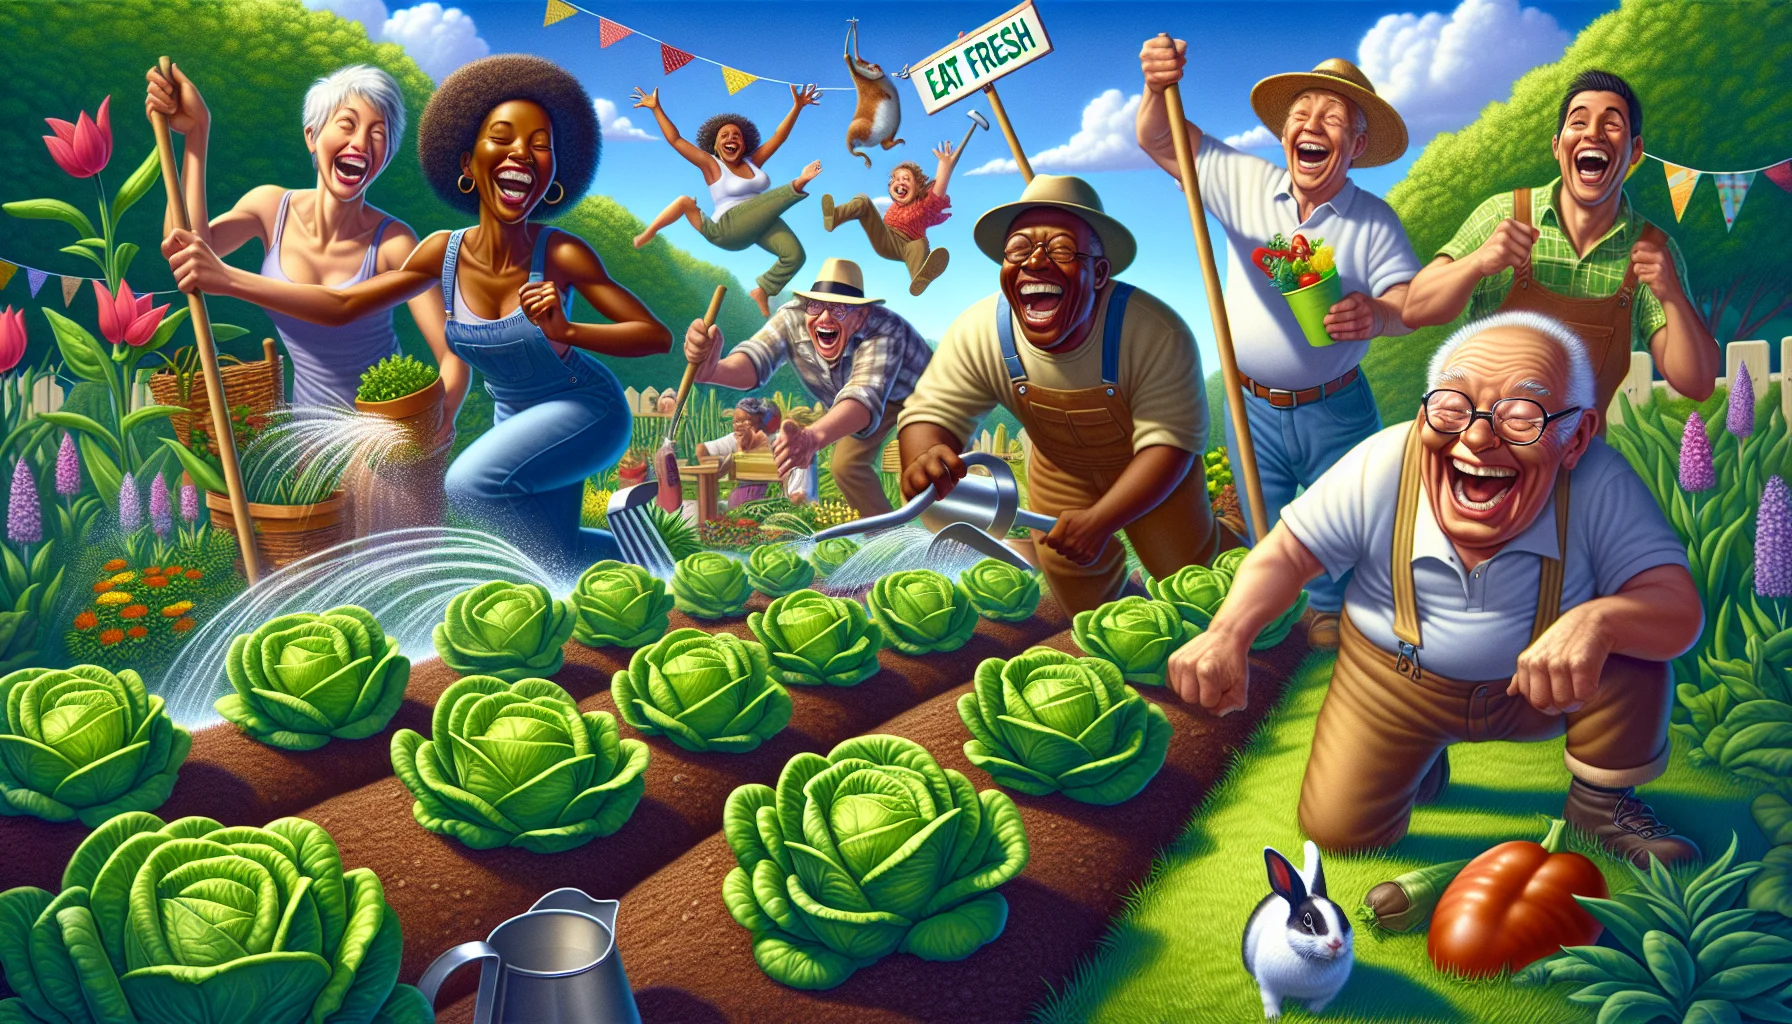 Skilfully depict a humorous scenario that urges people to enjoy the beauty of gardening. The focus of this energetic scene should be on growing bibb lettuce. In the foreground, portray an array of vibrant, healthy bibb lettuce heads sprouting enthusiastically from the ground. Surrounding them, showcase a diverse group of joyful individuals having a blast while gardening. A black woman is lovingly watering the vegetables, while a Hispanic man, laughing heartily, chases a rabbit, a common garden intruder, away with a garden rake. Directly behind them, a Caucasian elderly gentleman is seen chuckling while hanging an 'Eat Fresh' sign near the lettuce bed. In the background, highlight a sunny day, blue skies, and lush green vegetation, embodying the life and vigor that gardening can bring.